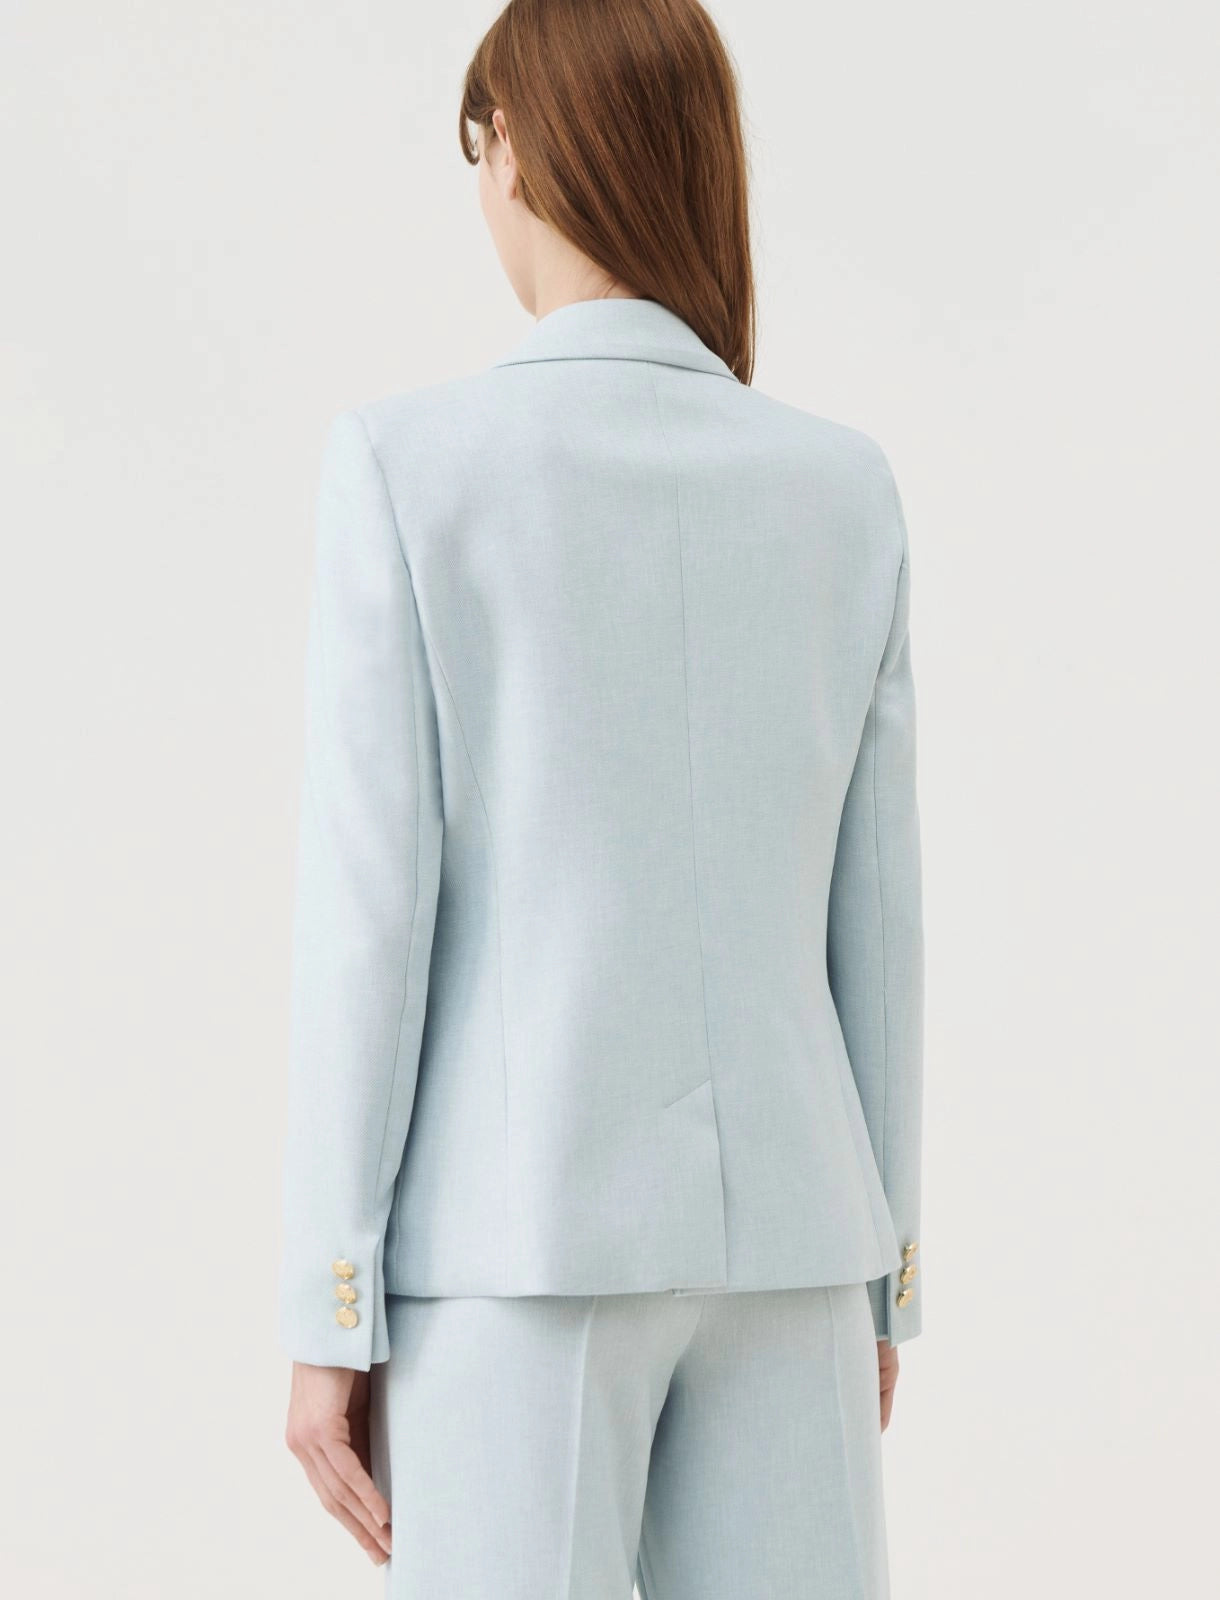 light blue double-breasted blazer